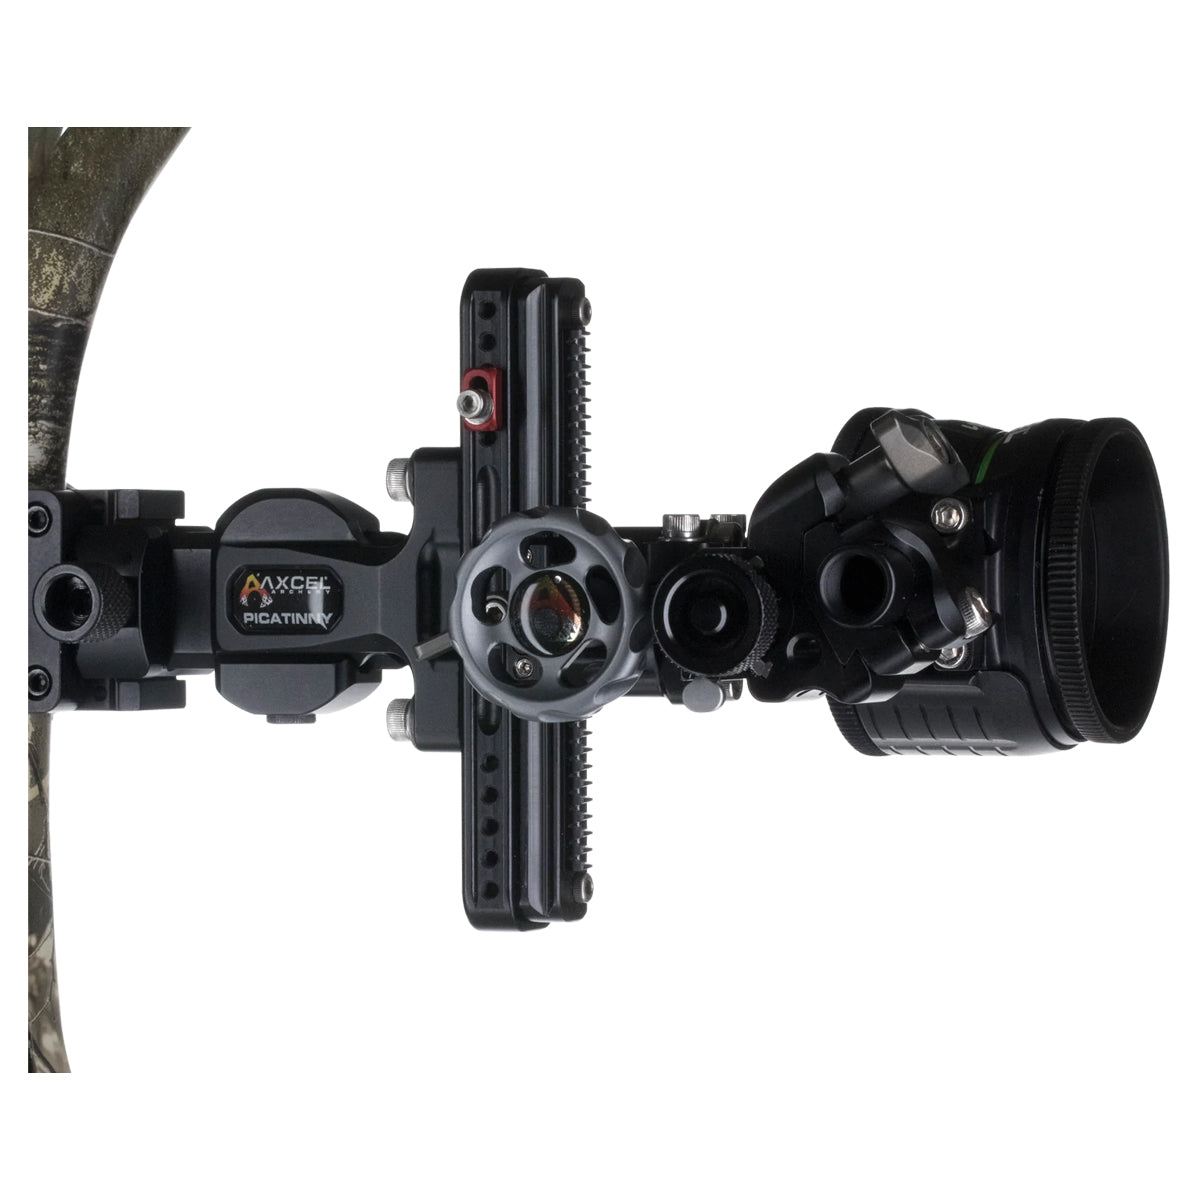 Axcel Landslyde Slider Sight Picatinny AVX-41 Scope 1 Pin Bow Sight in  by GOHUNT | Axcel - GOHUNT Shop